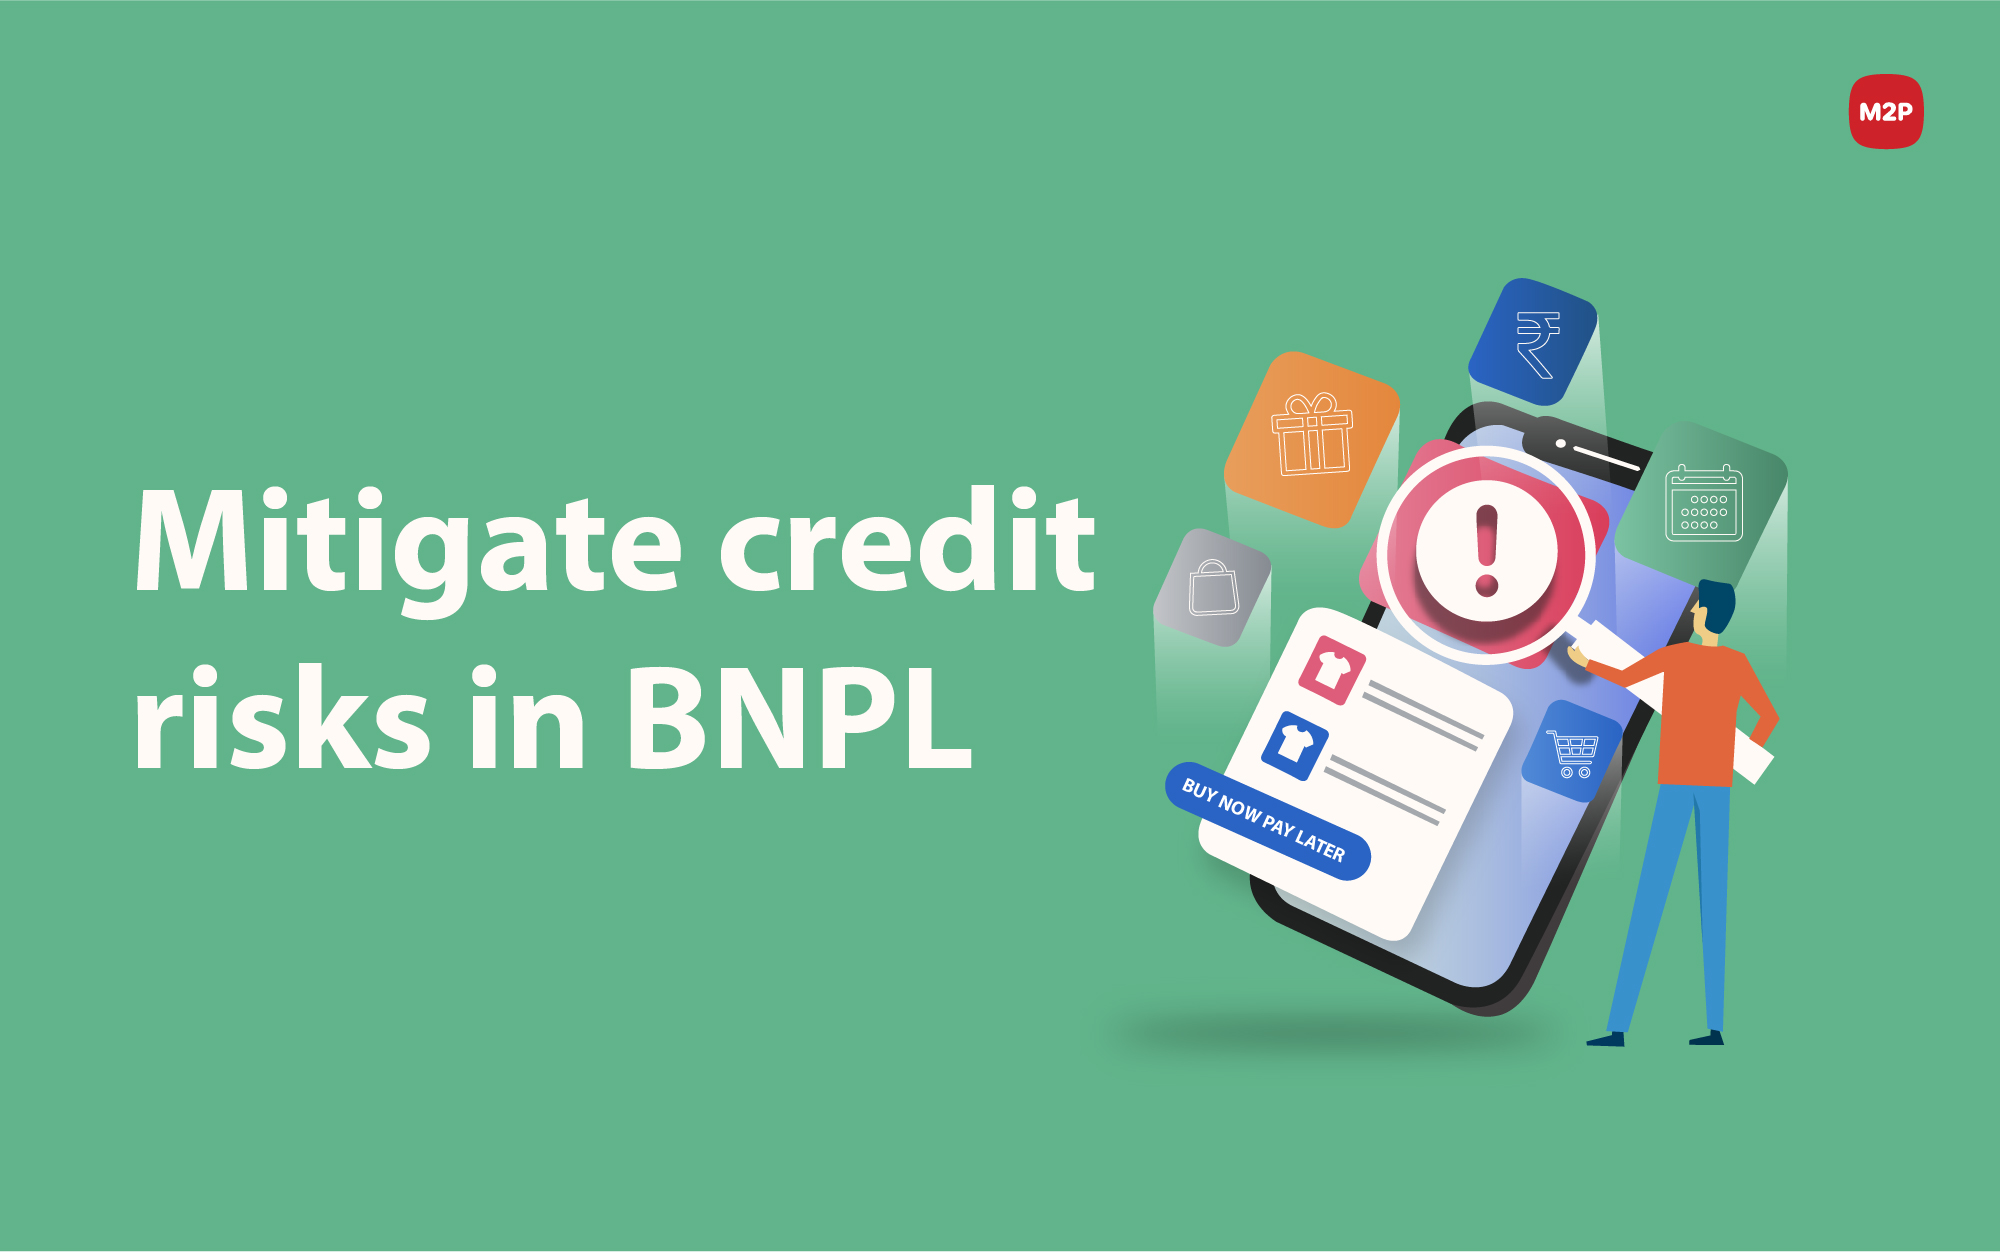 Strategies to reduce credit risks in BNPL